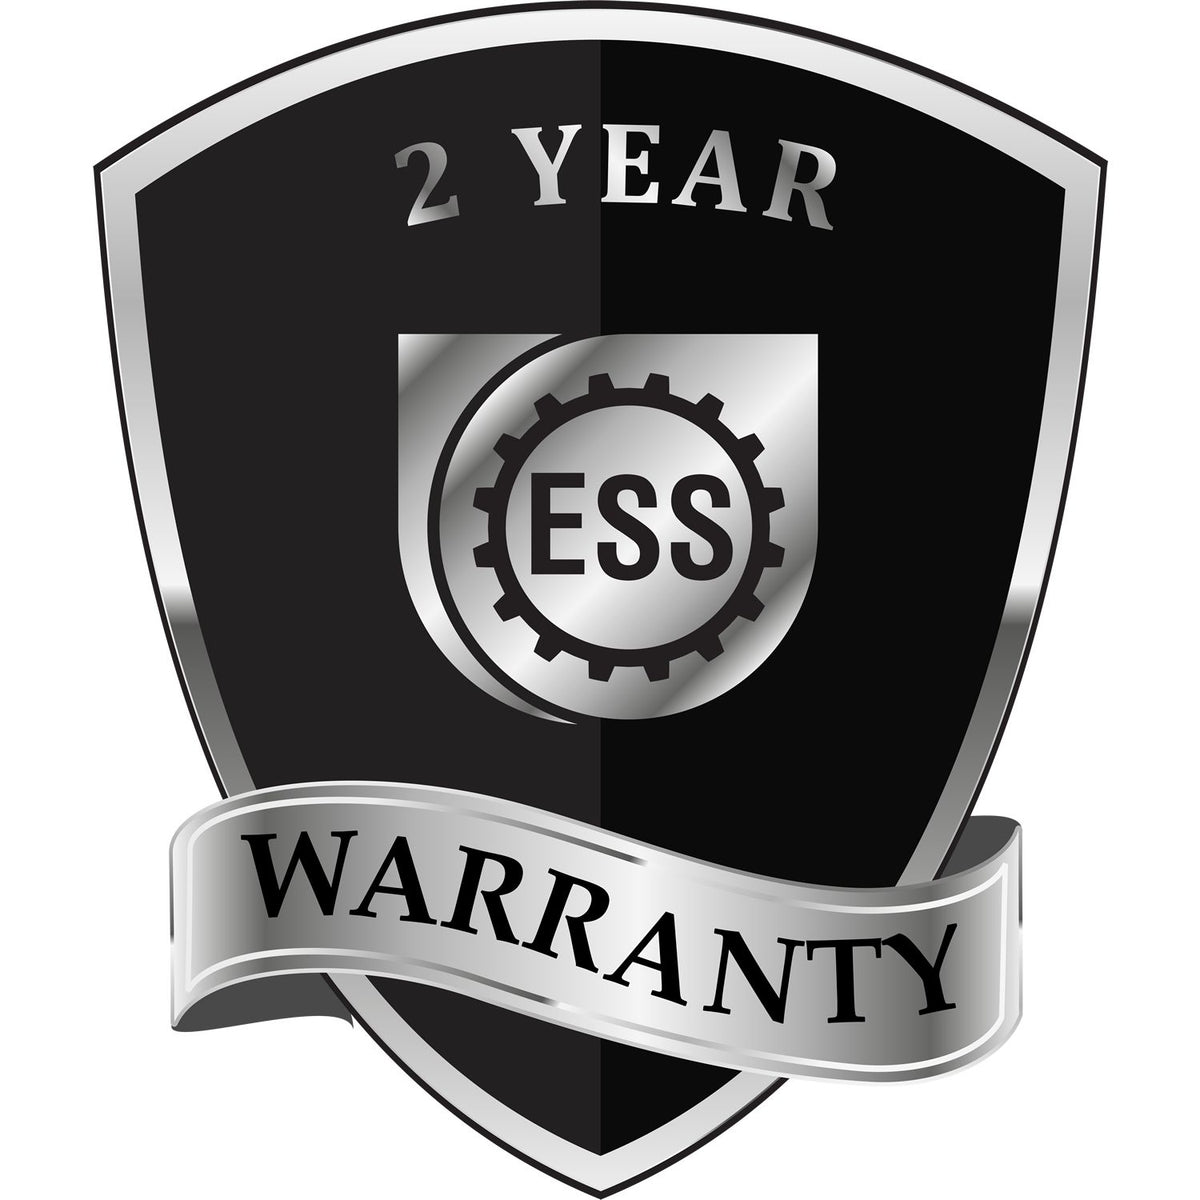 A black and silver badge or emblem showing warranty information for the Gift Arizona Engineer Seal